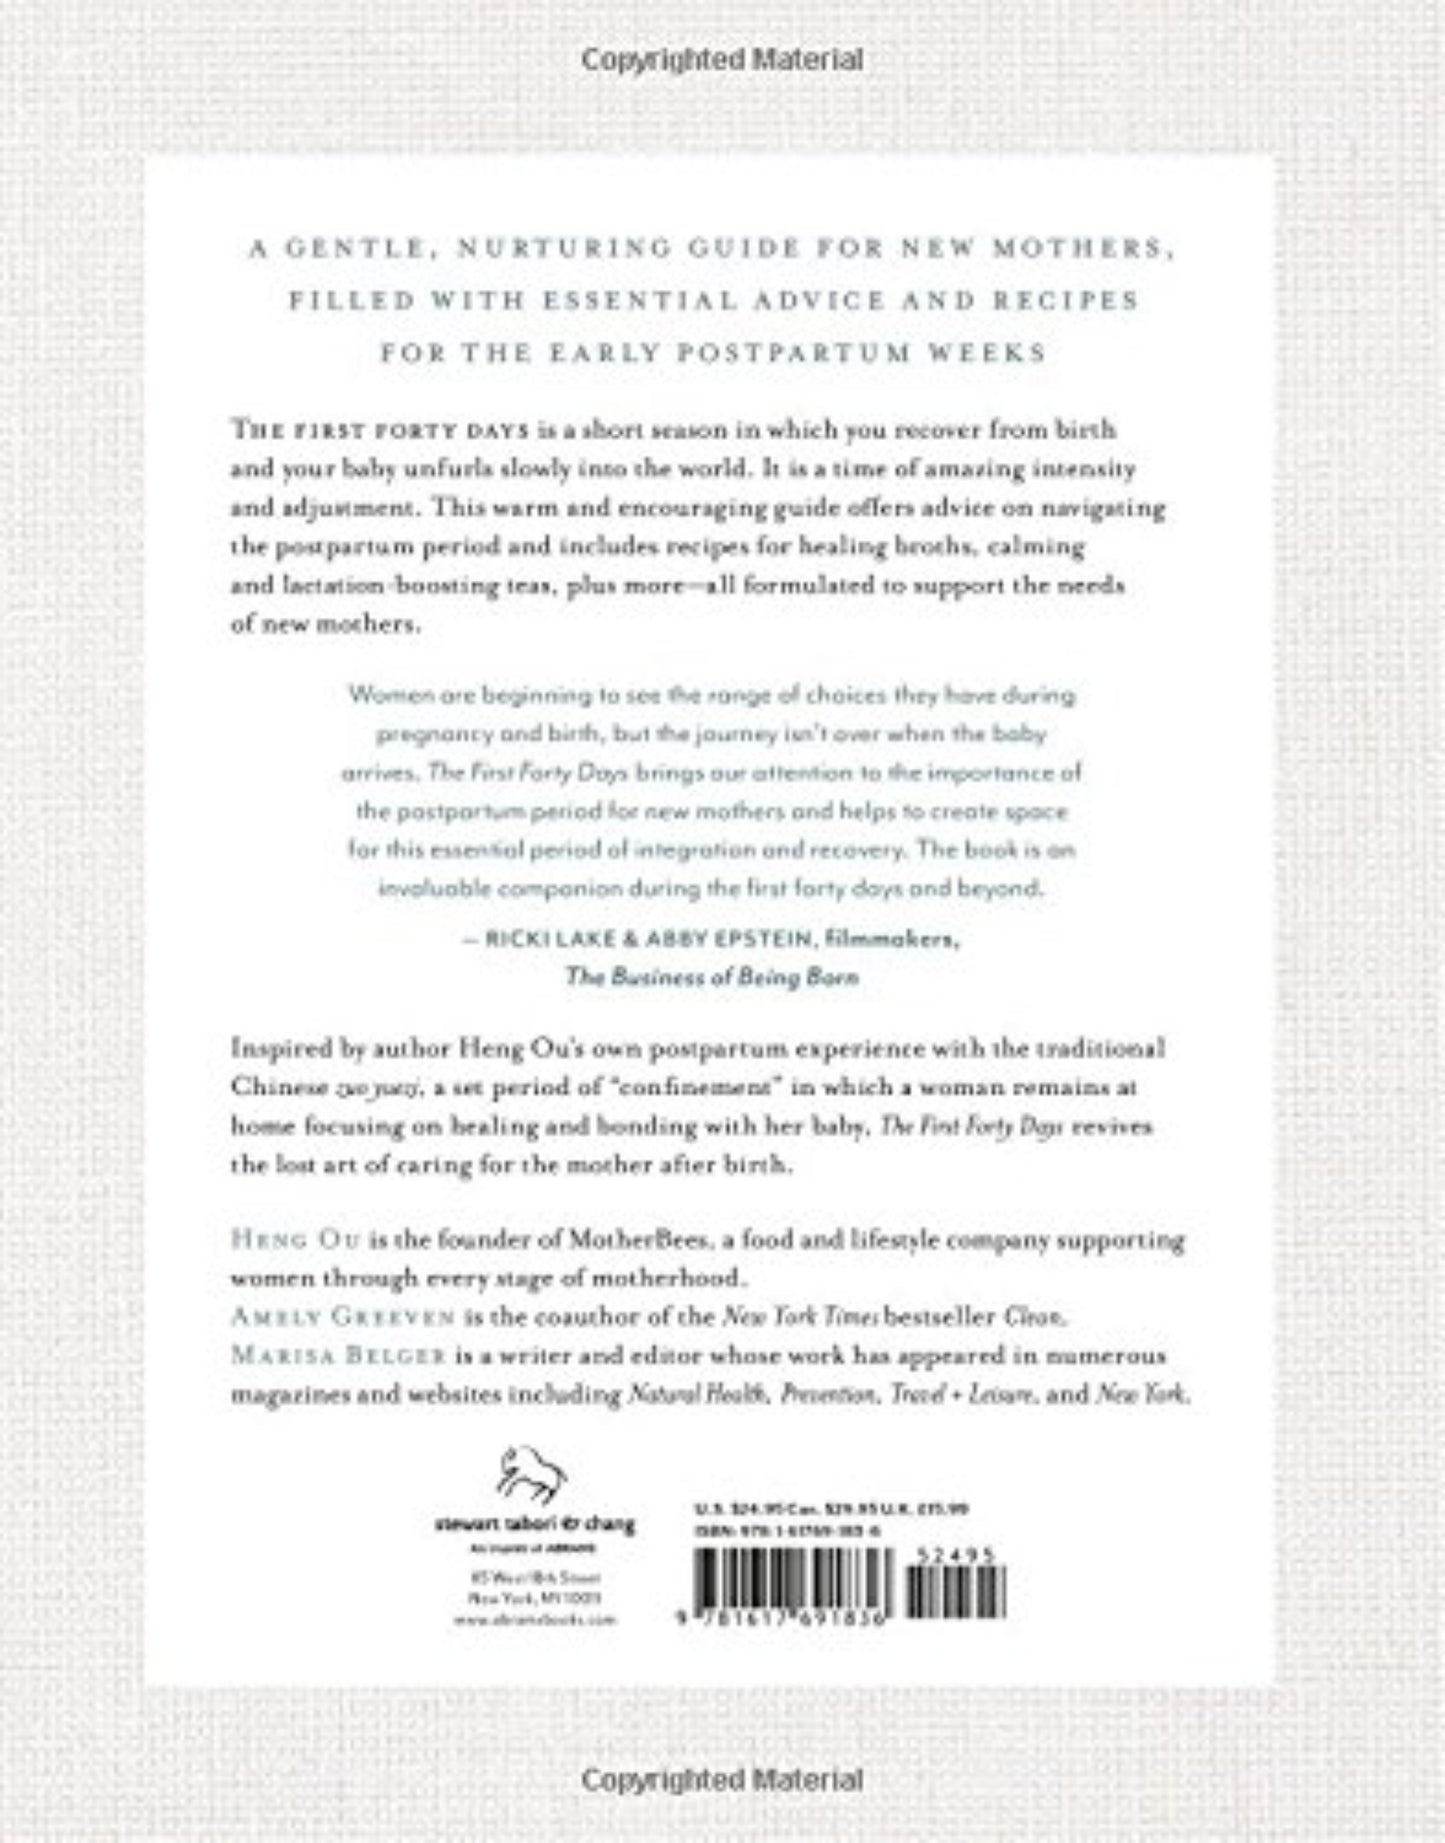 The First Forty Days: The Essential Art of Nourishing the New Mother / Heng Ou